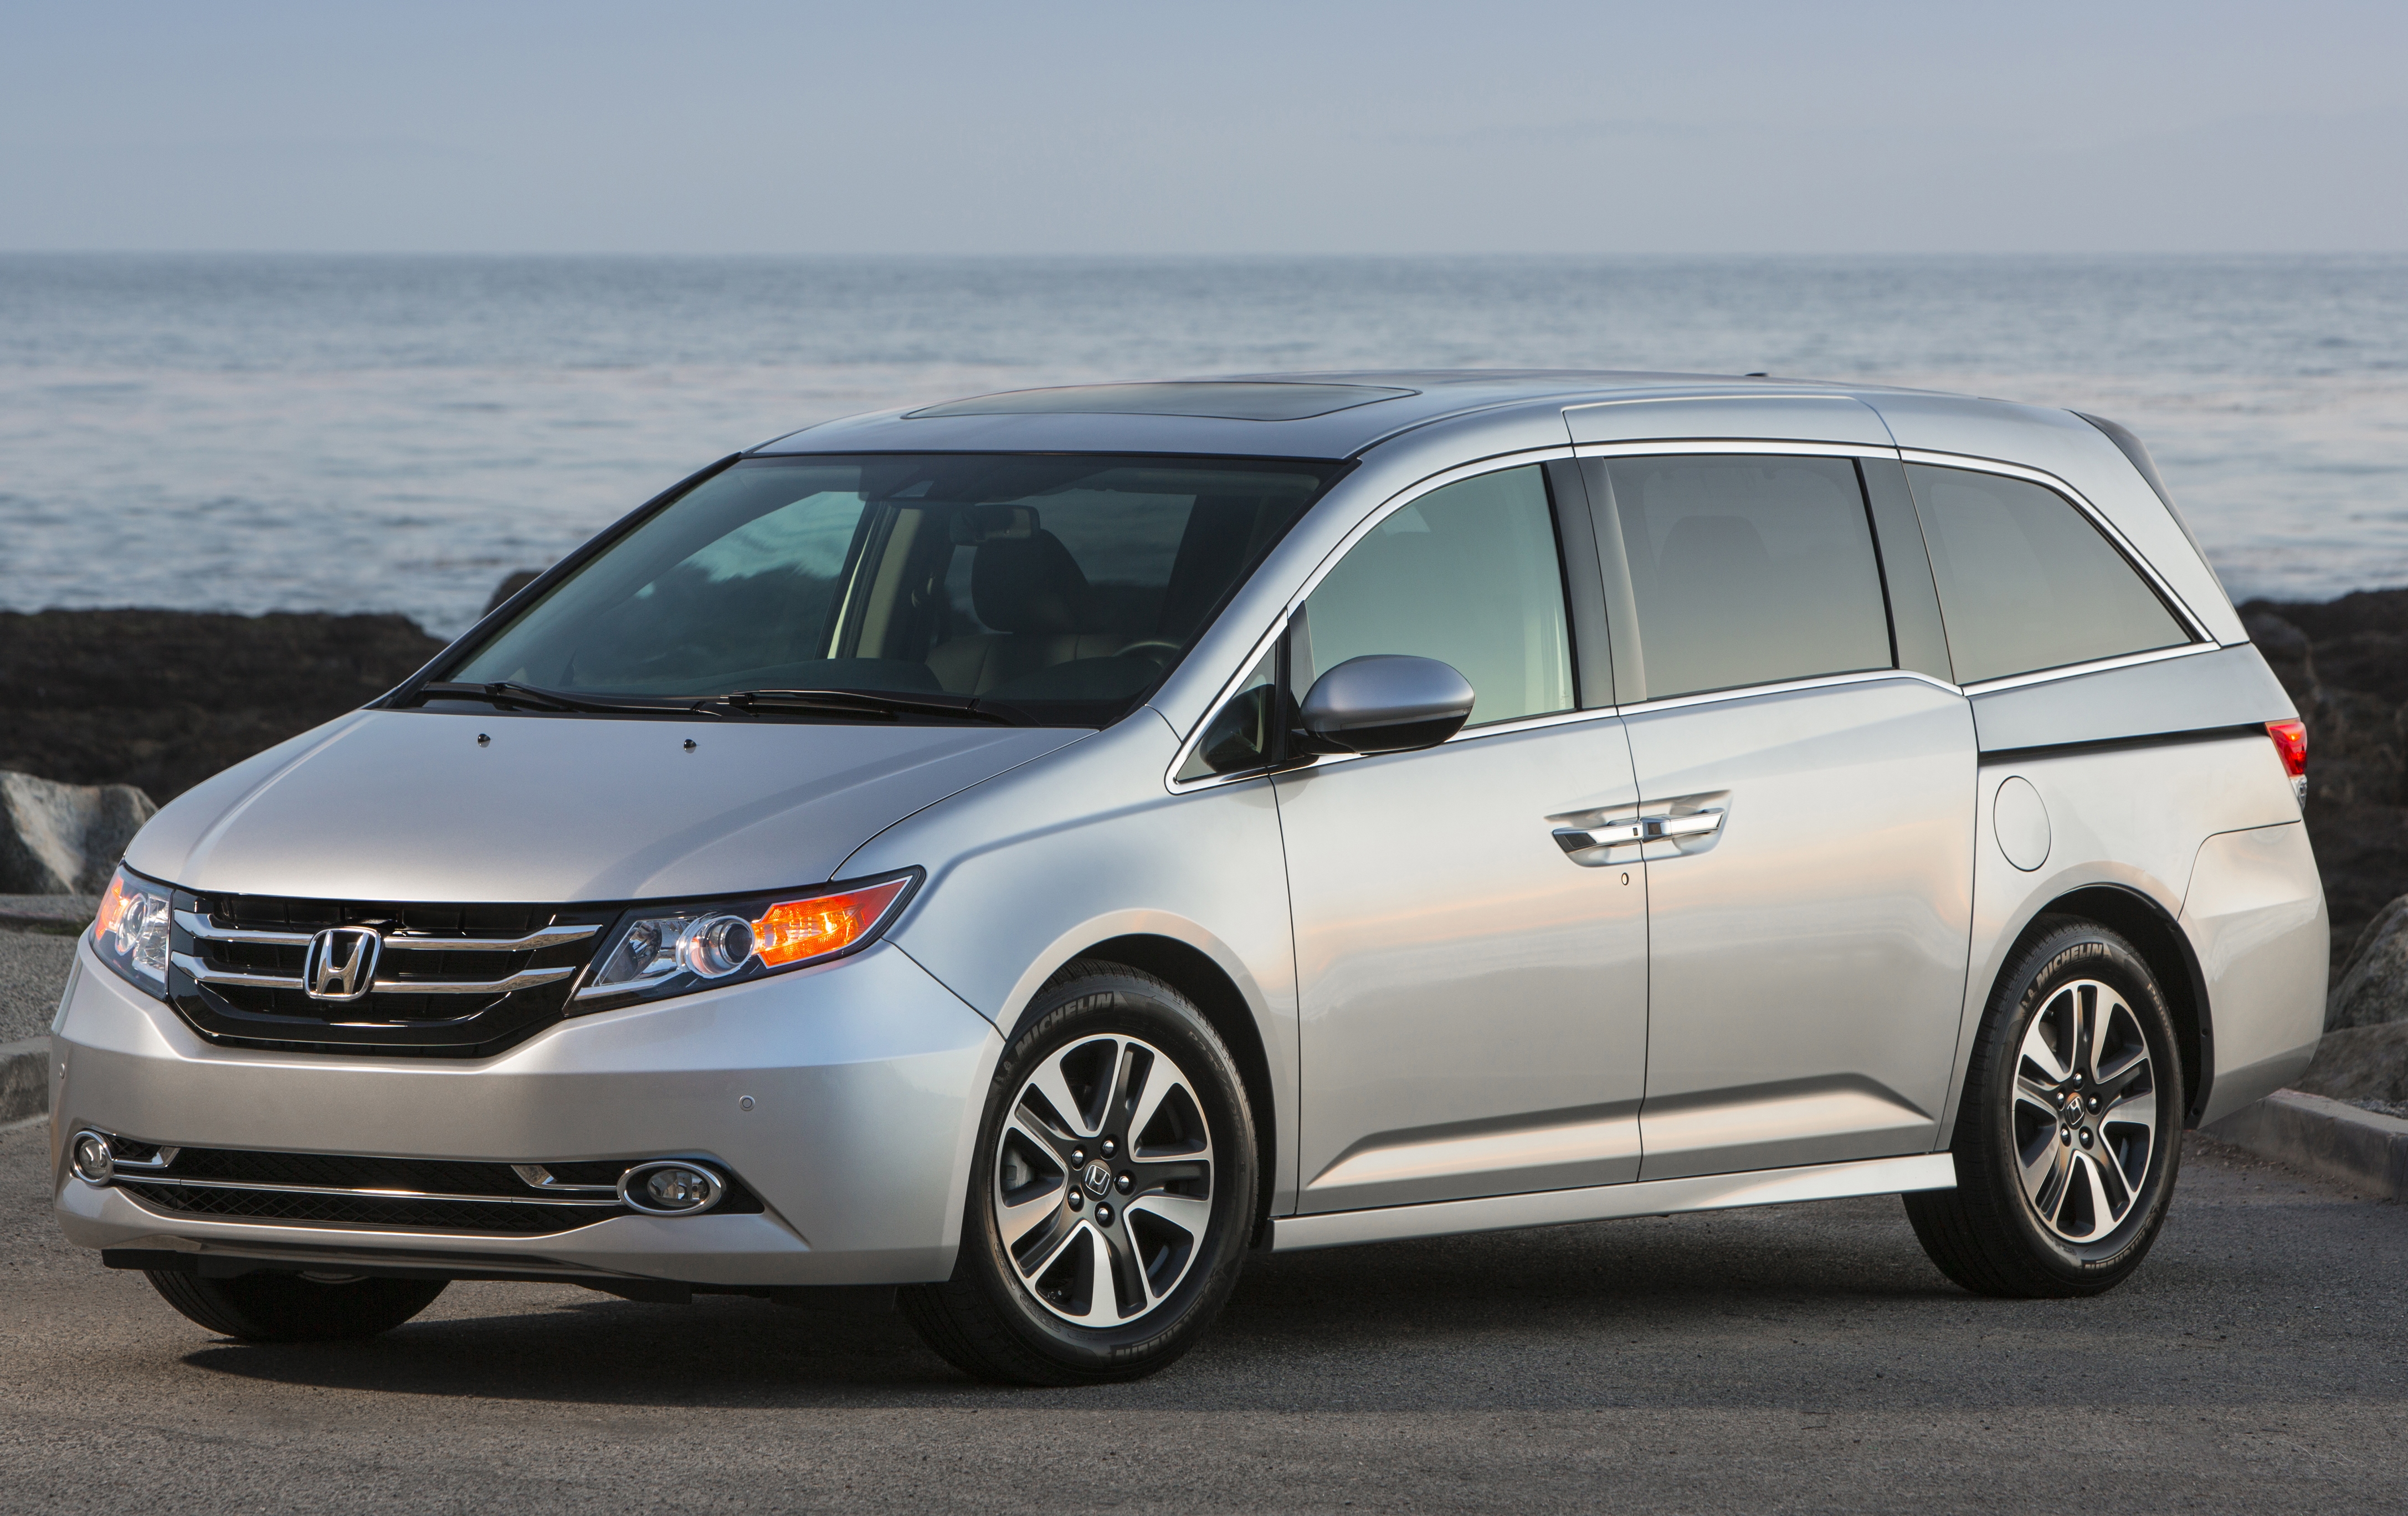 Top-selling Honda Odyssey and CR-V named ‘Best Cars for Families’ by U.S. News & World Report